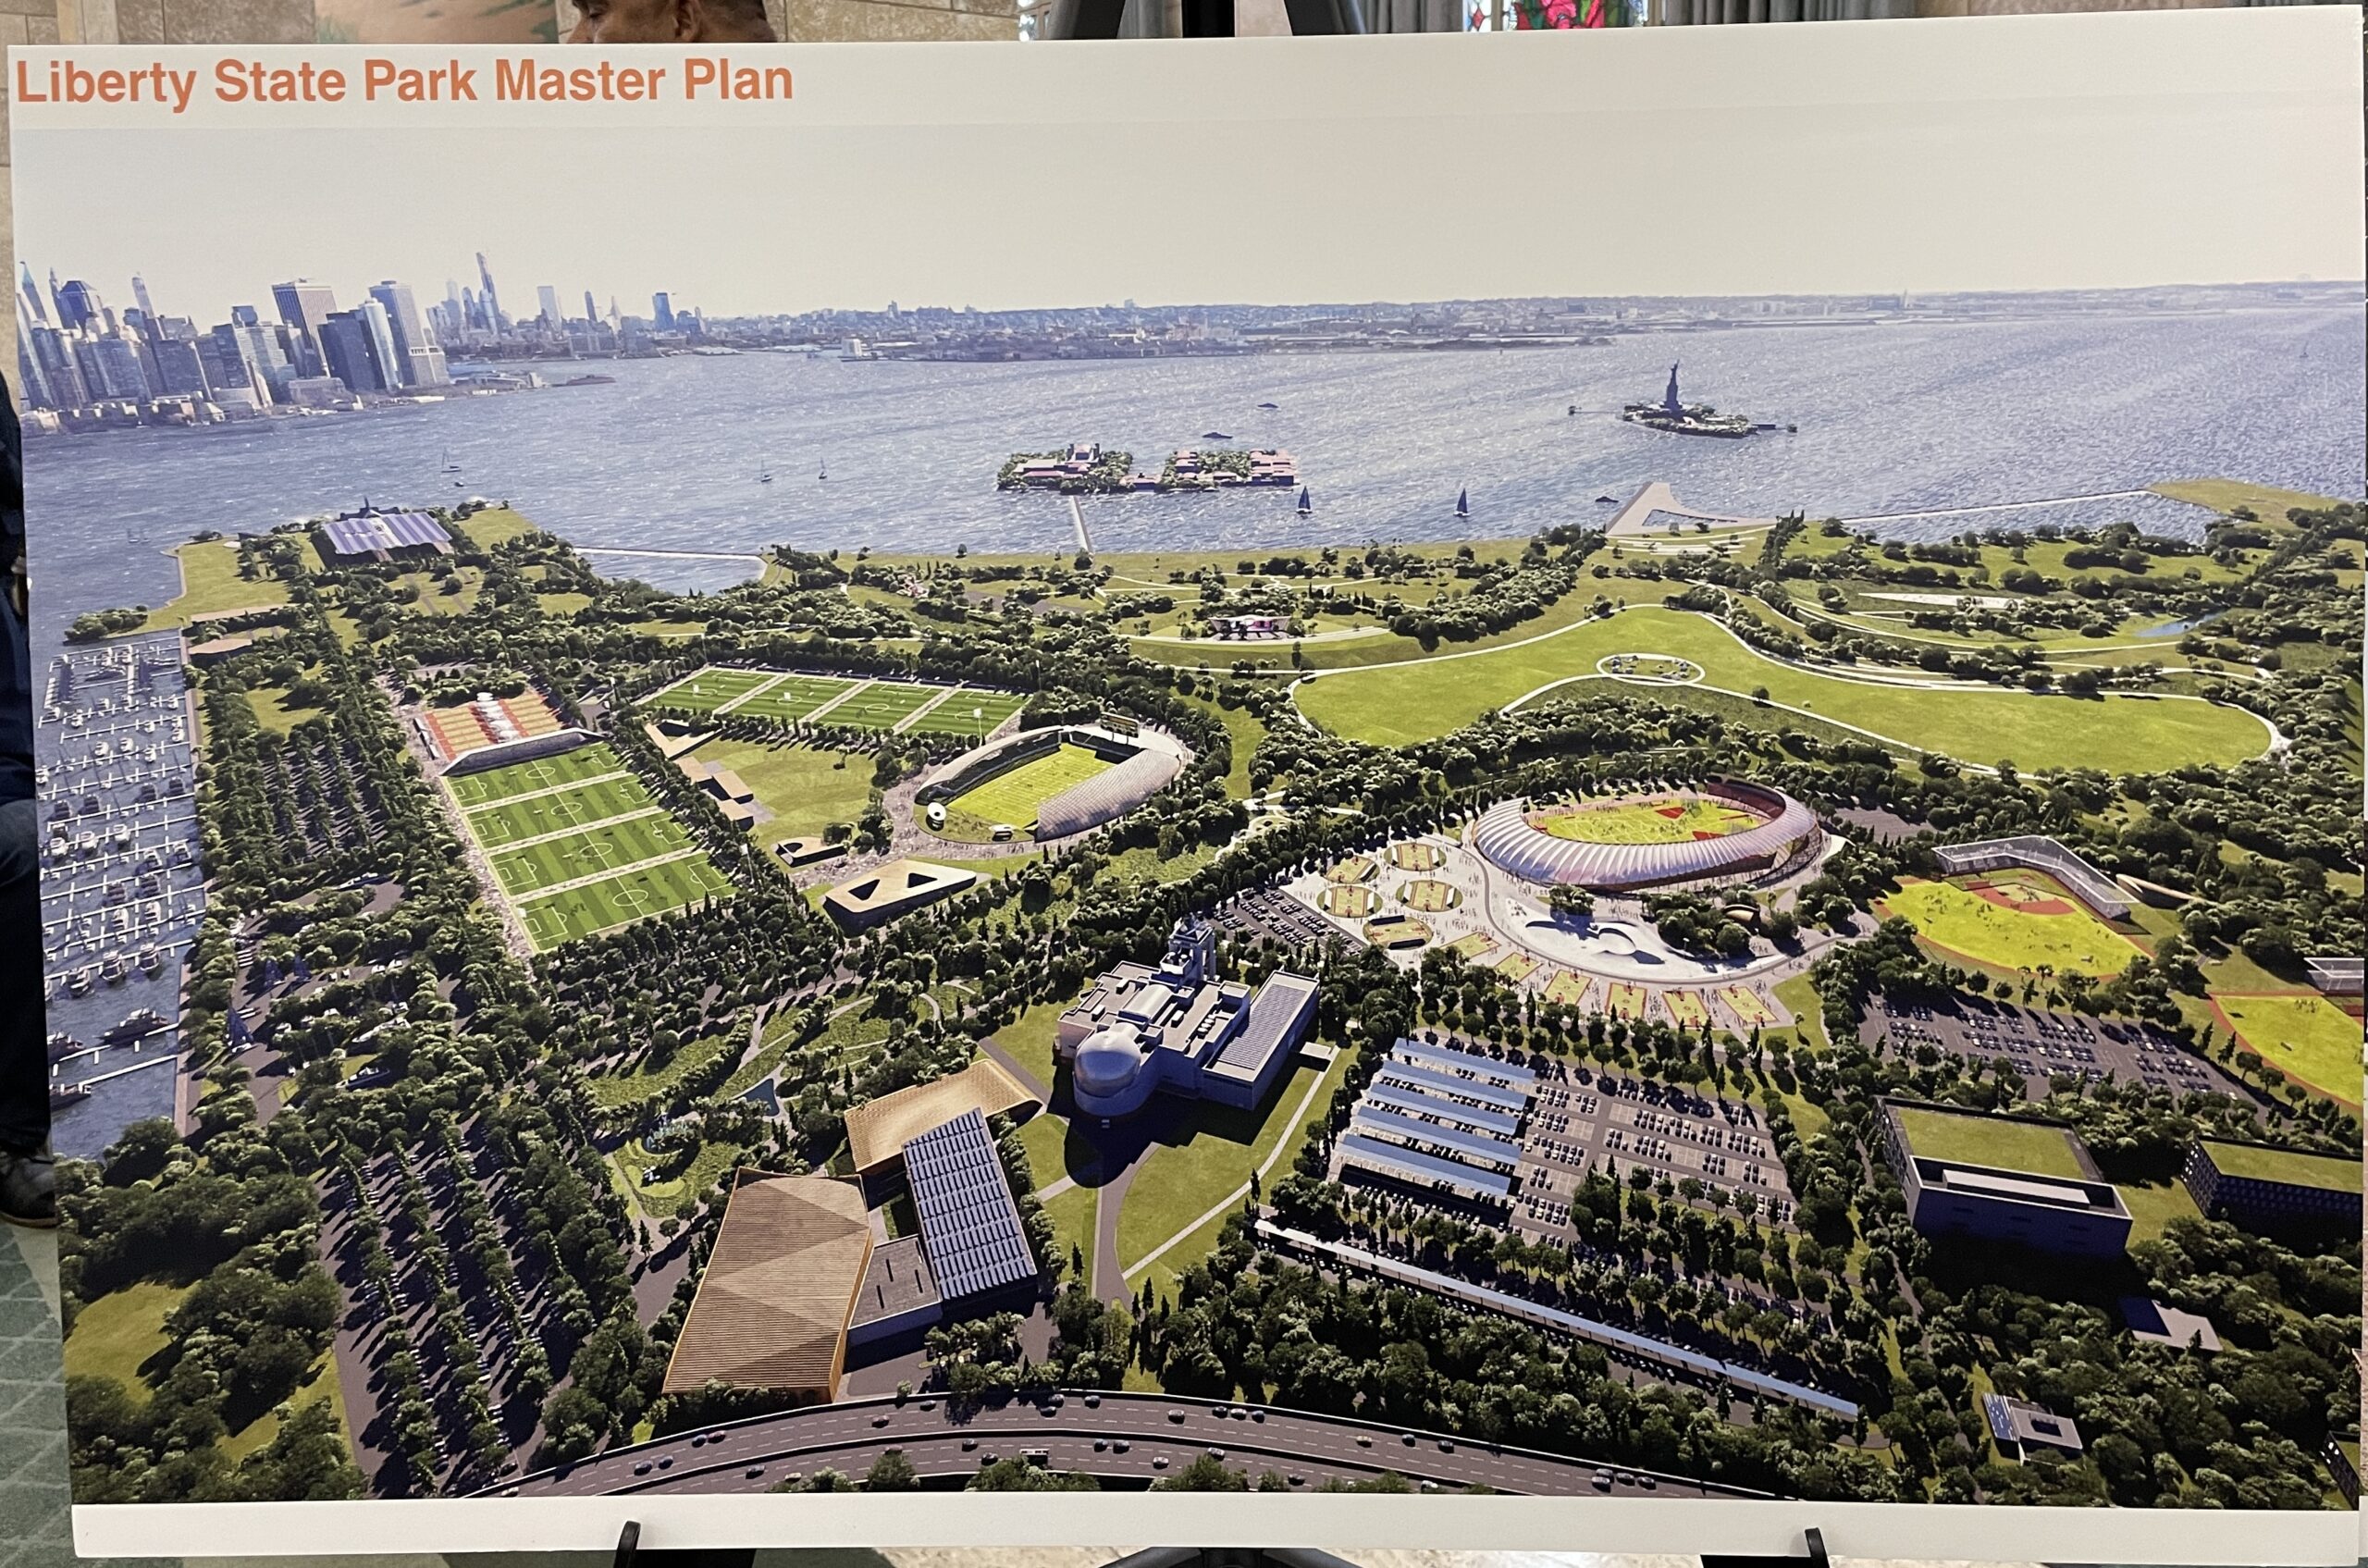 Poster labeled "Liberty State Park Master Plan" shows aerial view of a waterside park with fields, buildings, and natural spaces